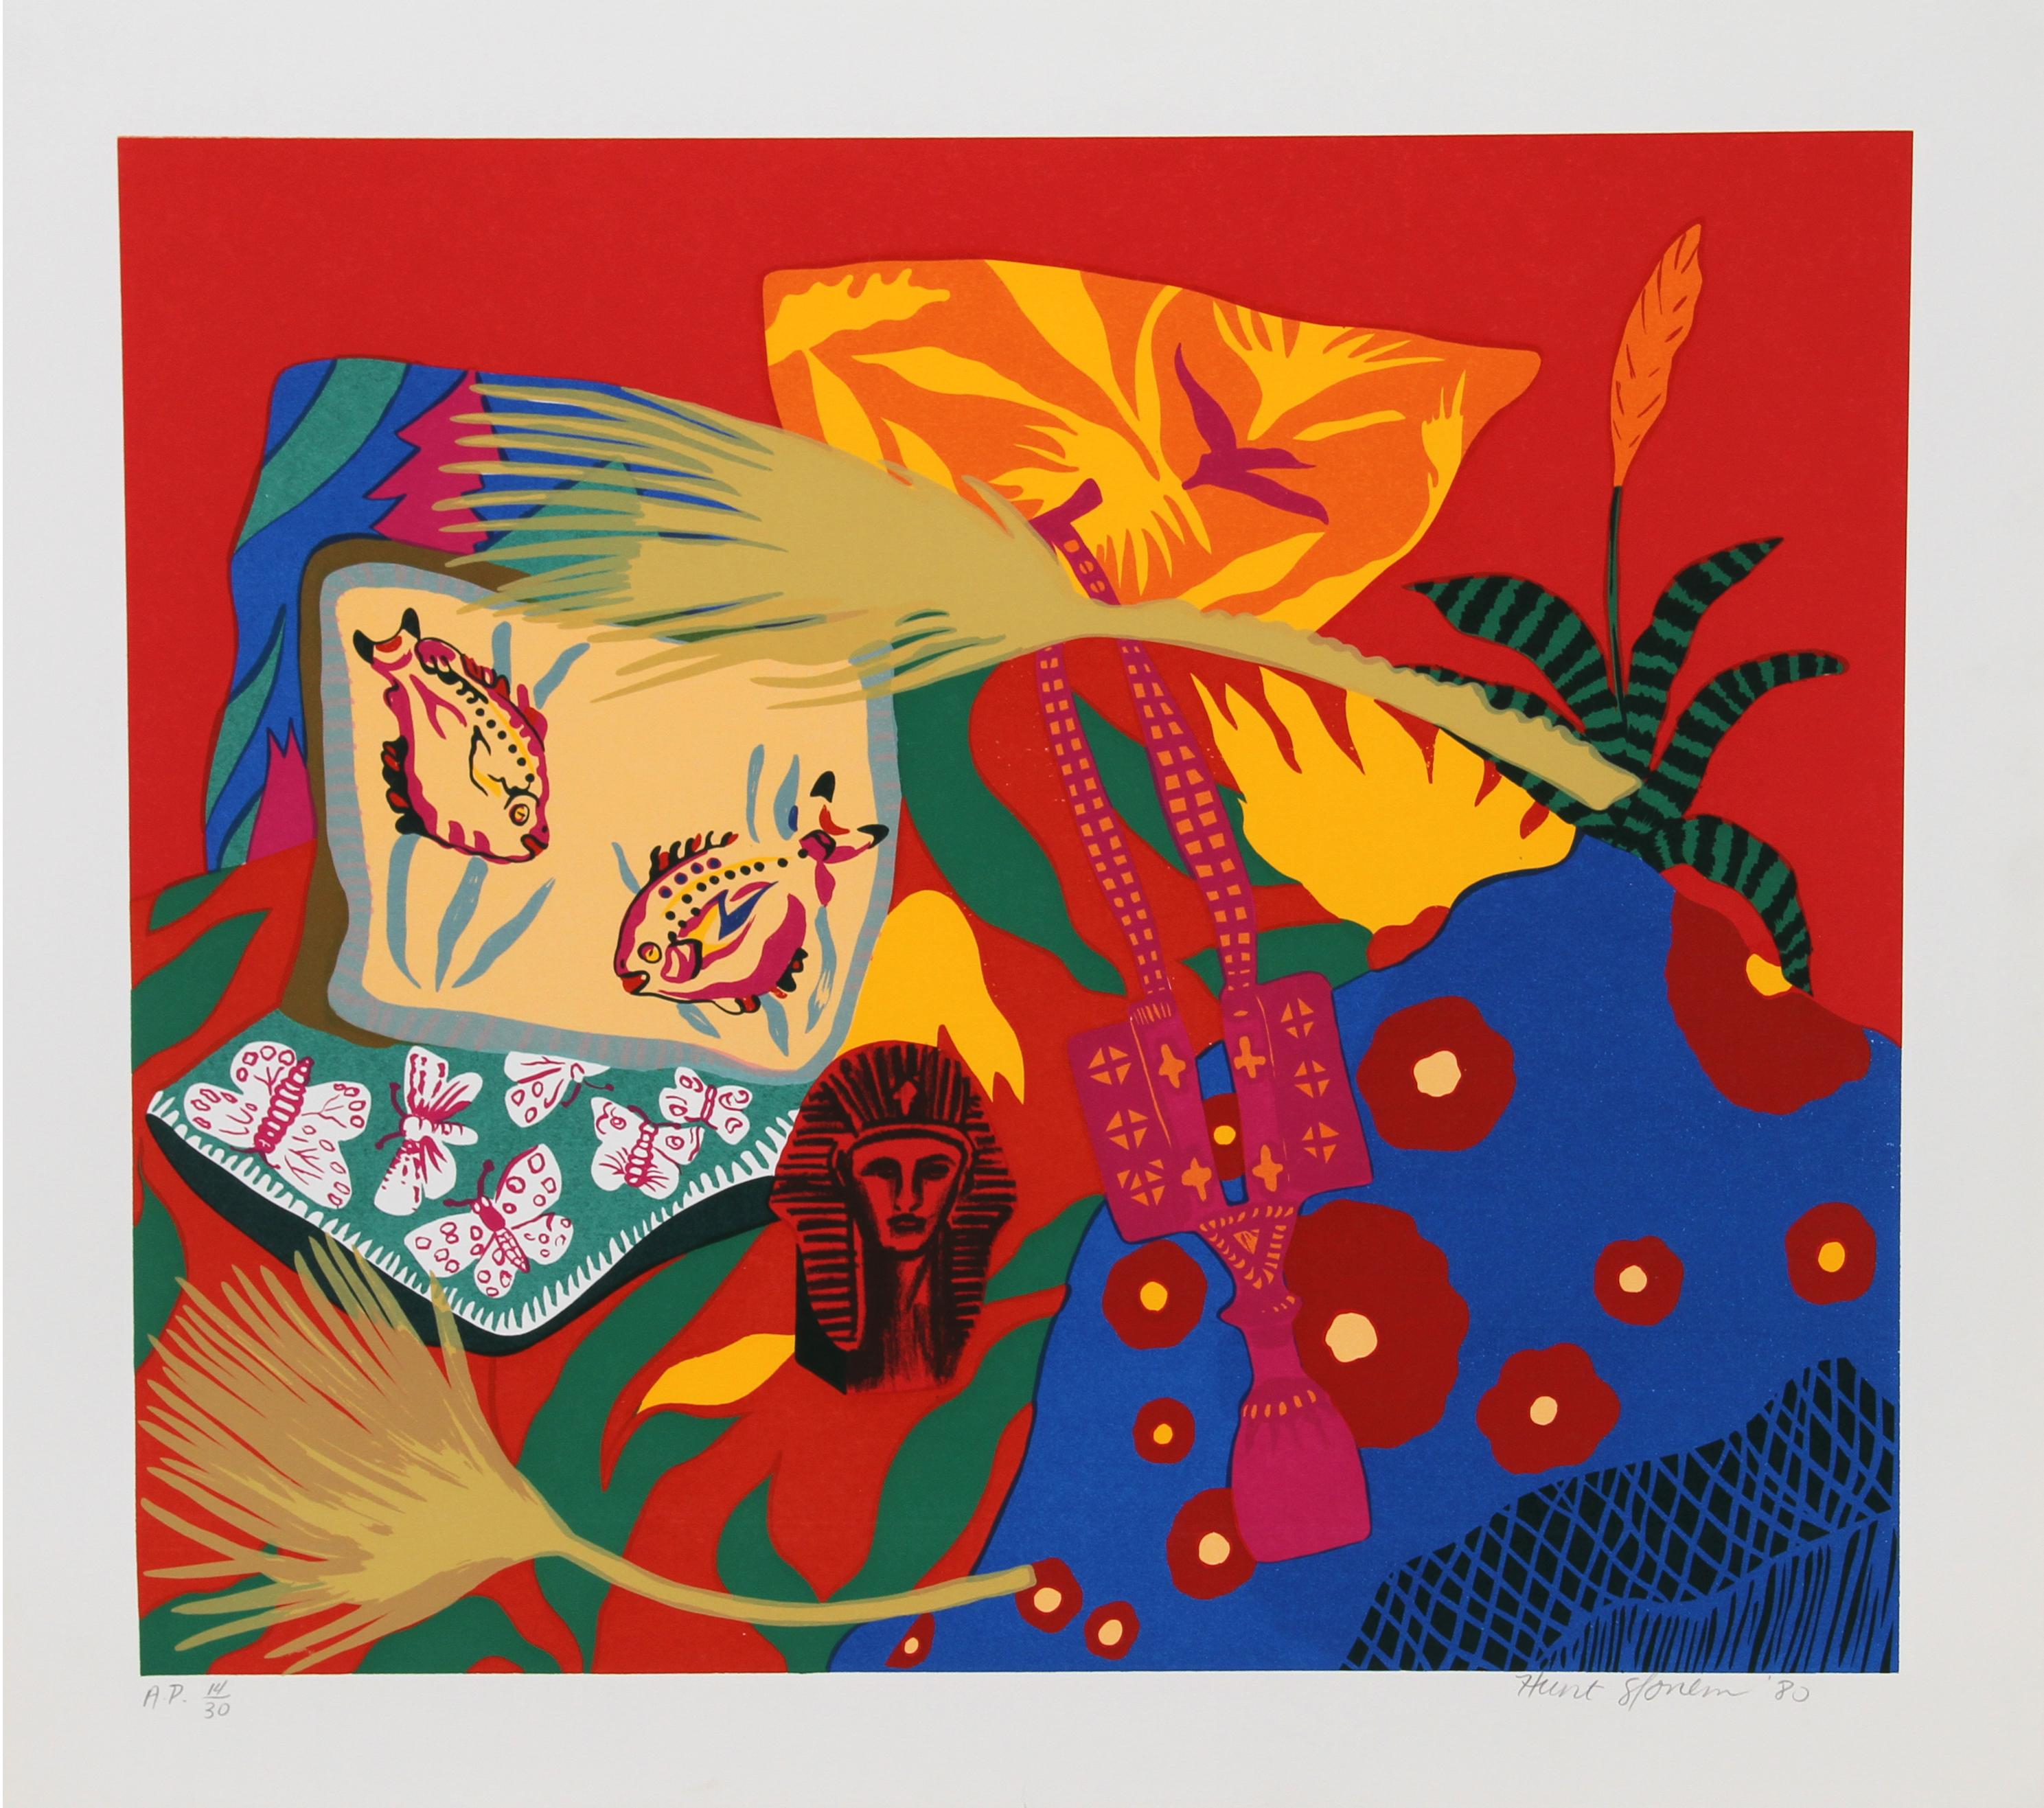 Artist:  Hunt Slonem, American (1951 - )
Title:  Tribute
Year:  1980
Medium:  Serigraph, signed and numbered in pencil
Edition:  AP 30
Image Size:  22 x 25 inches
Size:  26 in. x 29.5 in. (66.04 cm x 74.93 cm)